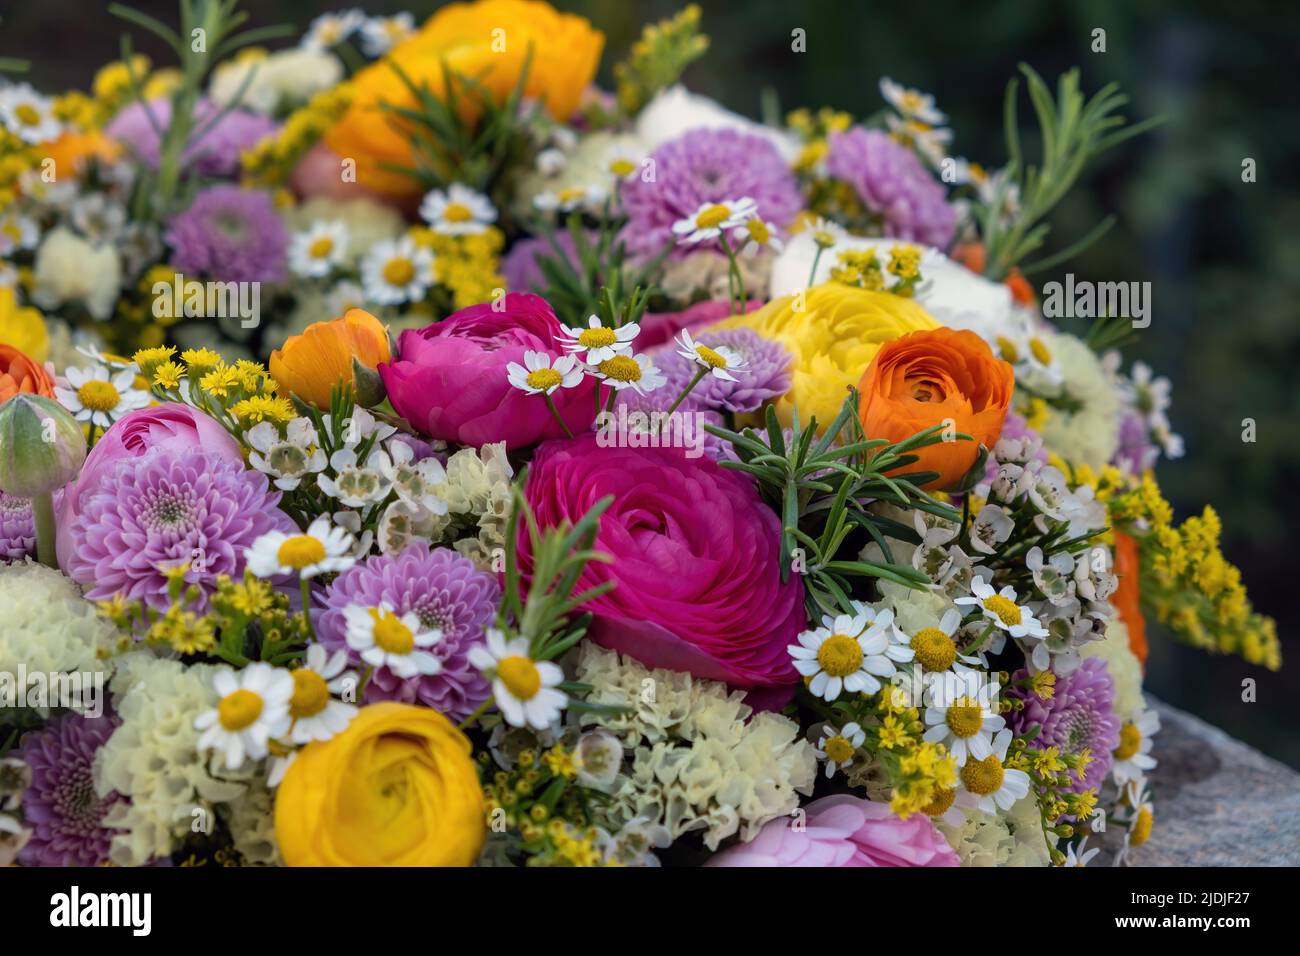 Fresh colorful wild flowers and herbs, close up view. Garden nature blooming, Spring. Women or Mothers day celebration bouquet Stock Photo